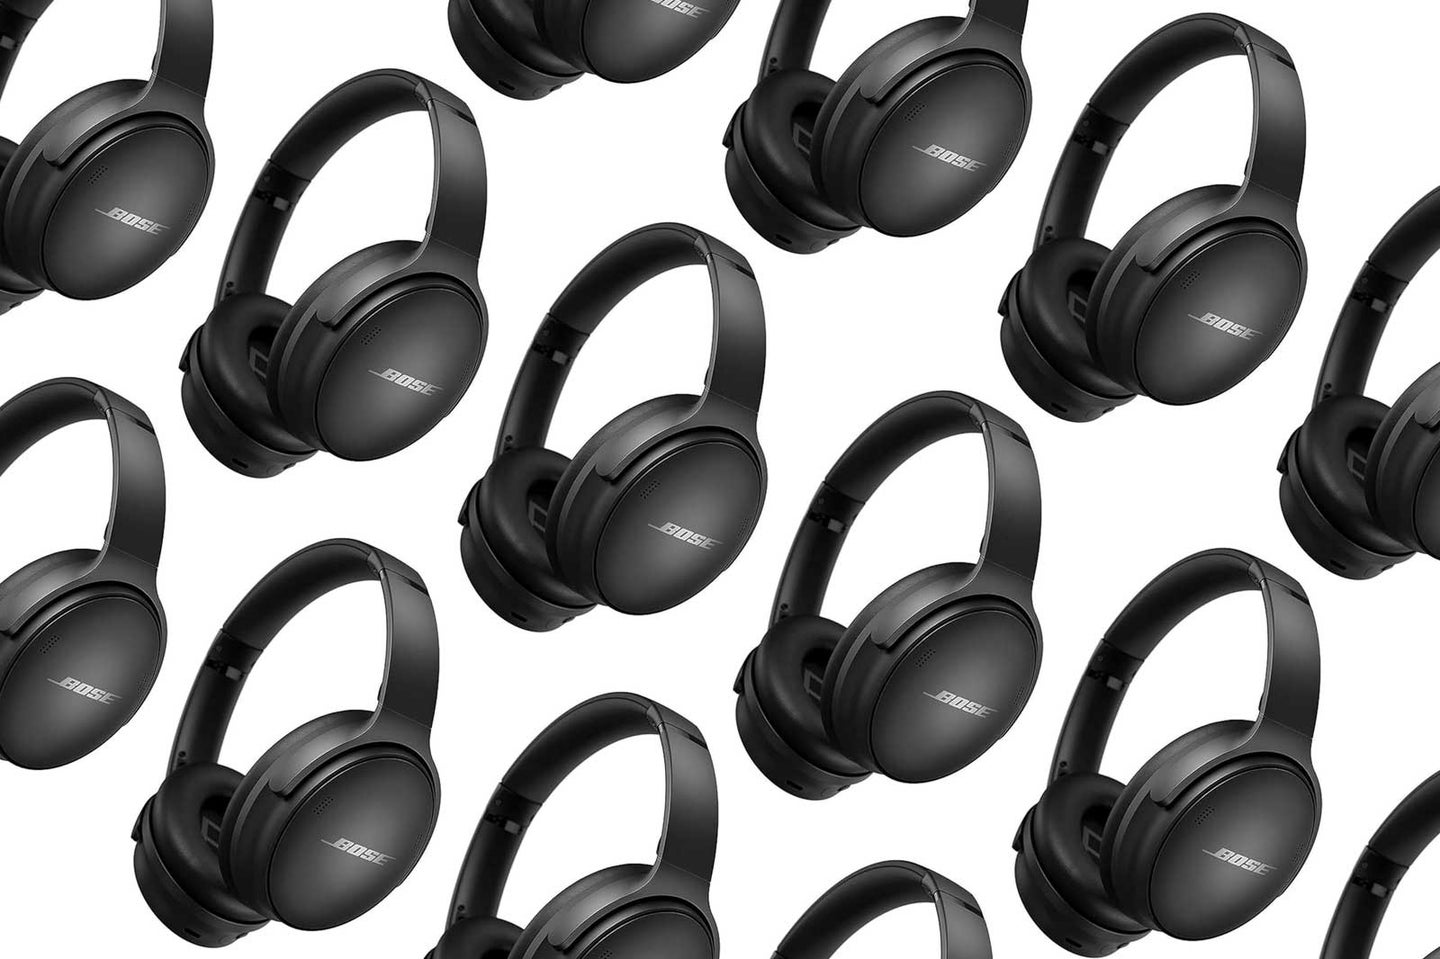 Bose QuietComfort 45 headphones arranged in a pattern on a plain background